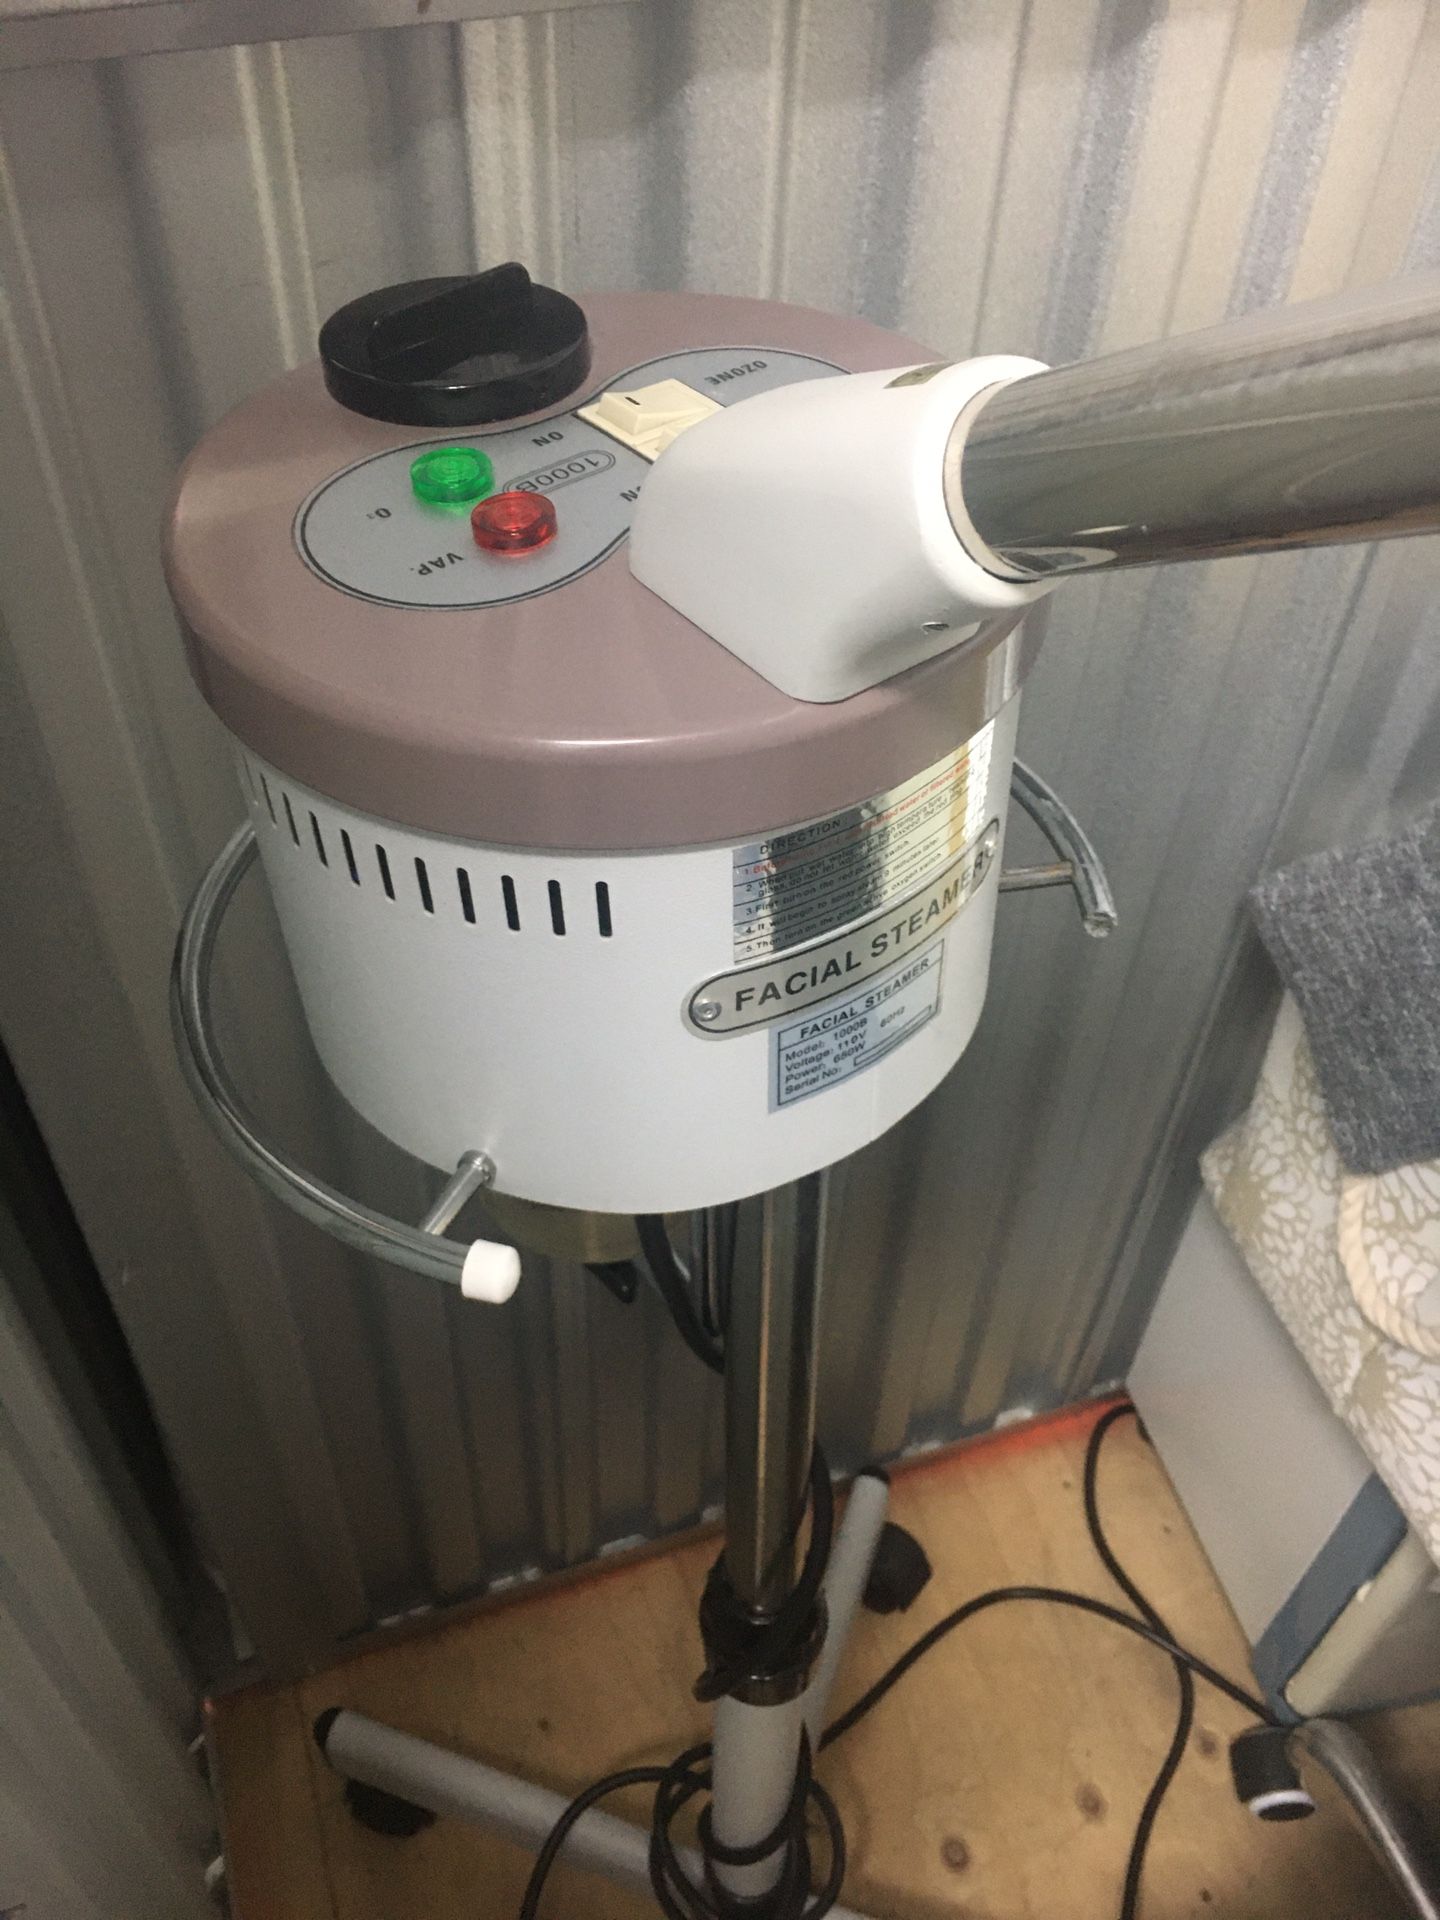 Facial Steamer With Ozone